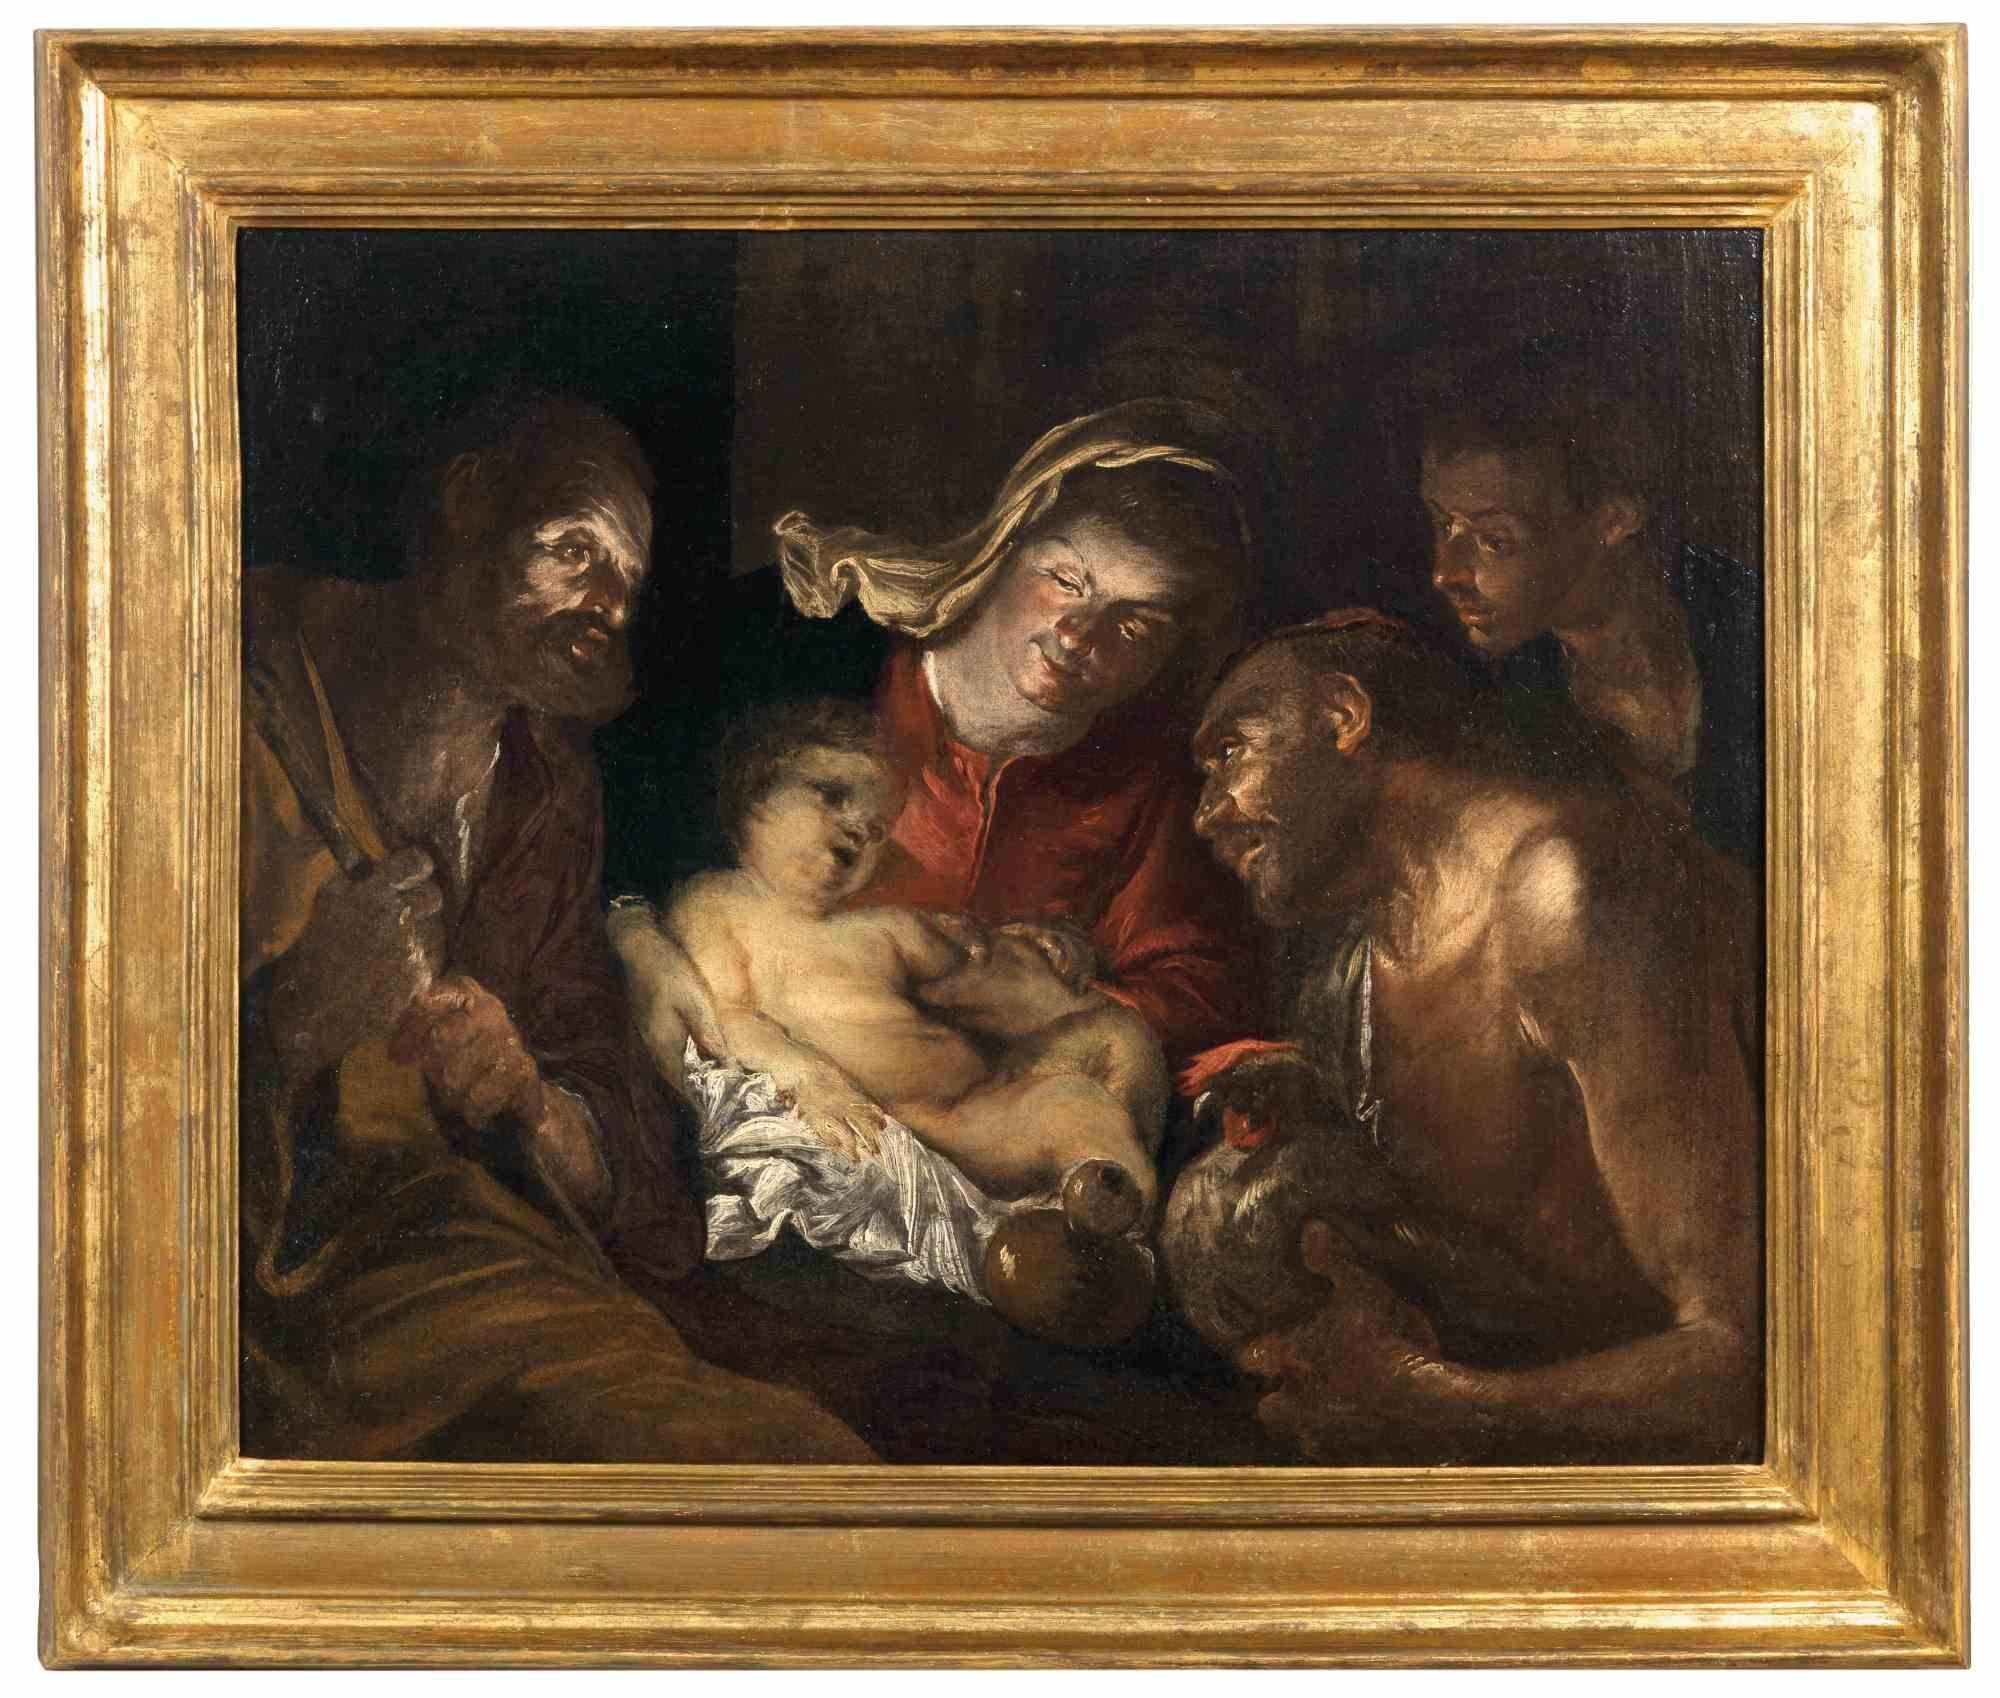 The Adoration is an original modern artwork realized by Giuseppe Assereto (died in Genoa in 1650) in the first half of the 17th Century. 

Original Oil Painting on Canvas.

A 19th Century style gilded wood frame is included. 

The Autograph of the